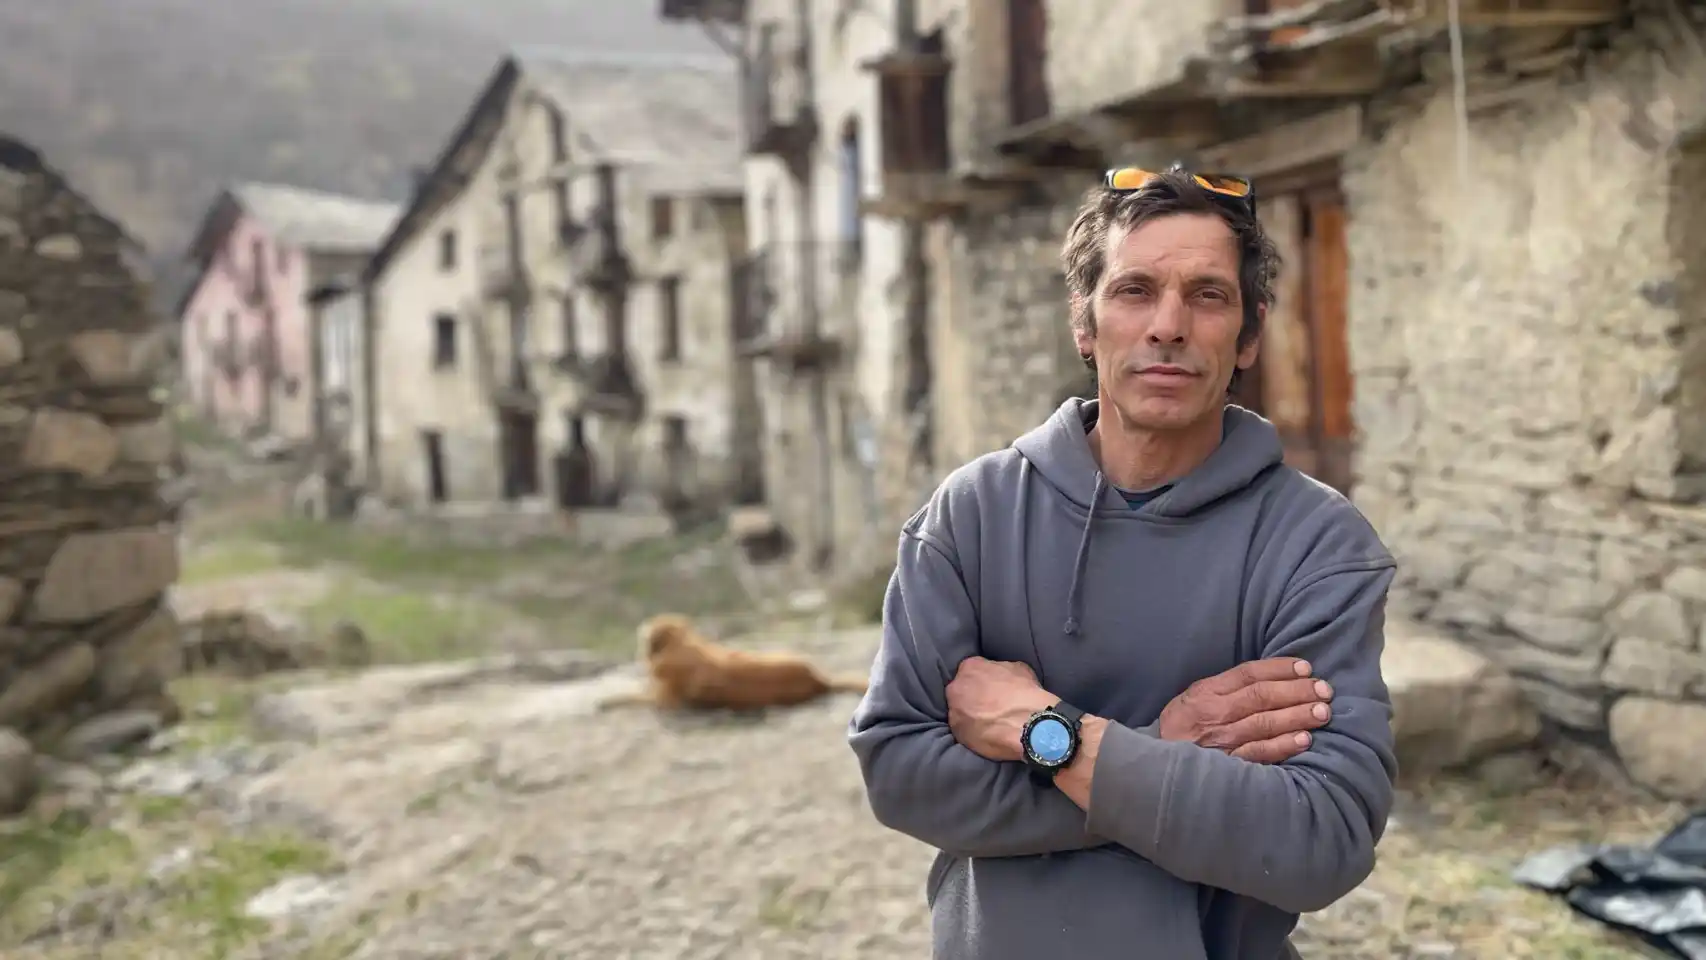 Eloi Renau, the only resident of Àrreu, has taken on the task of bringing this century-old village in the Catalan Pyrenees back to life.  Photo: The Spaniards/Marc Solanes